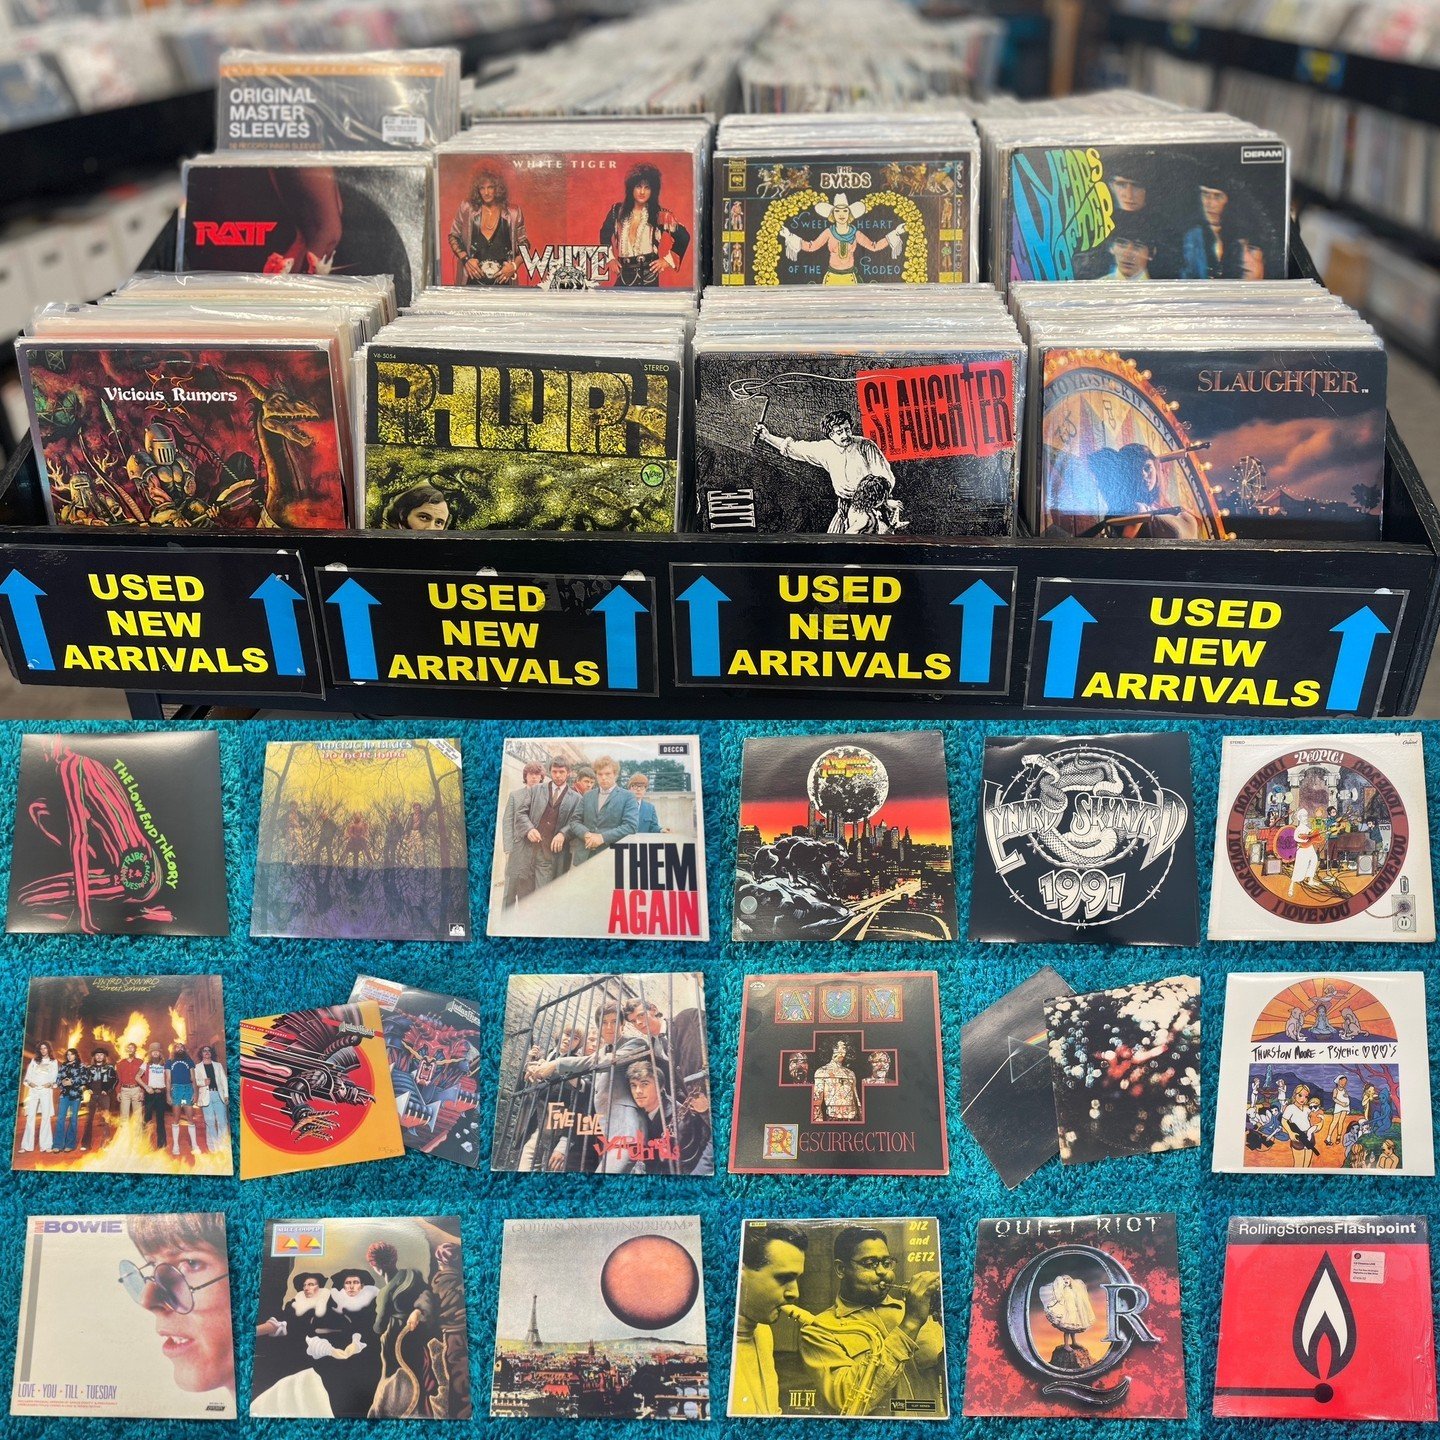 Lots of great new arrivals going out on Saturday!  Ratt, White Tiger, The Byrds, Ten Years After, Vicious Rumors, Phluph, Slaughter (Originals!), A Tribe Called Quest, American Blues (Early Pre-ZZ Top!), Them, Thin Lizzy, Lynyrd Skynyrd, People, Juda